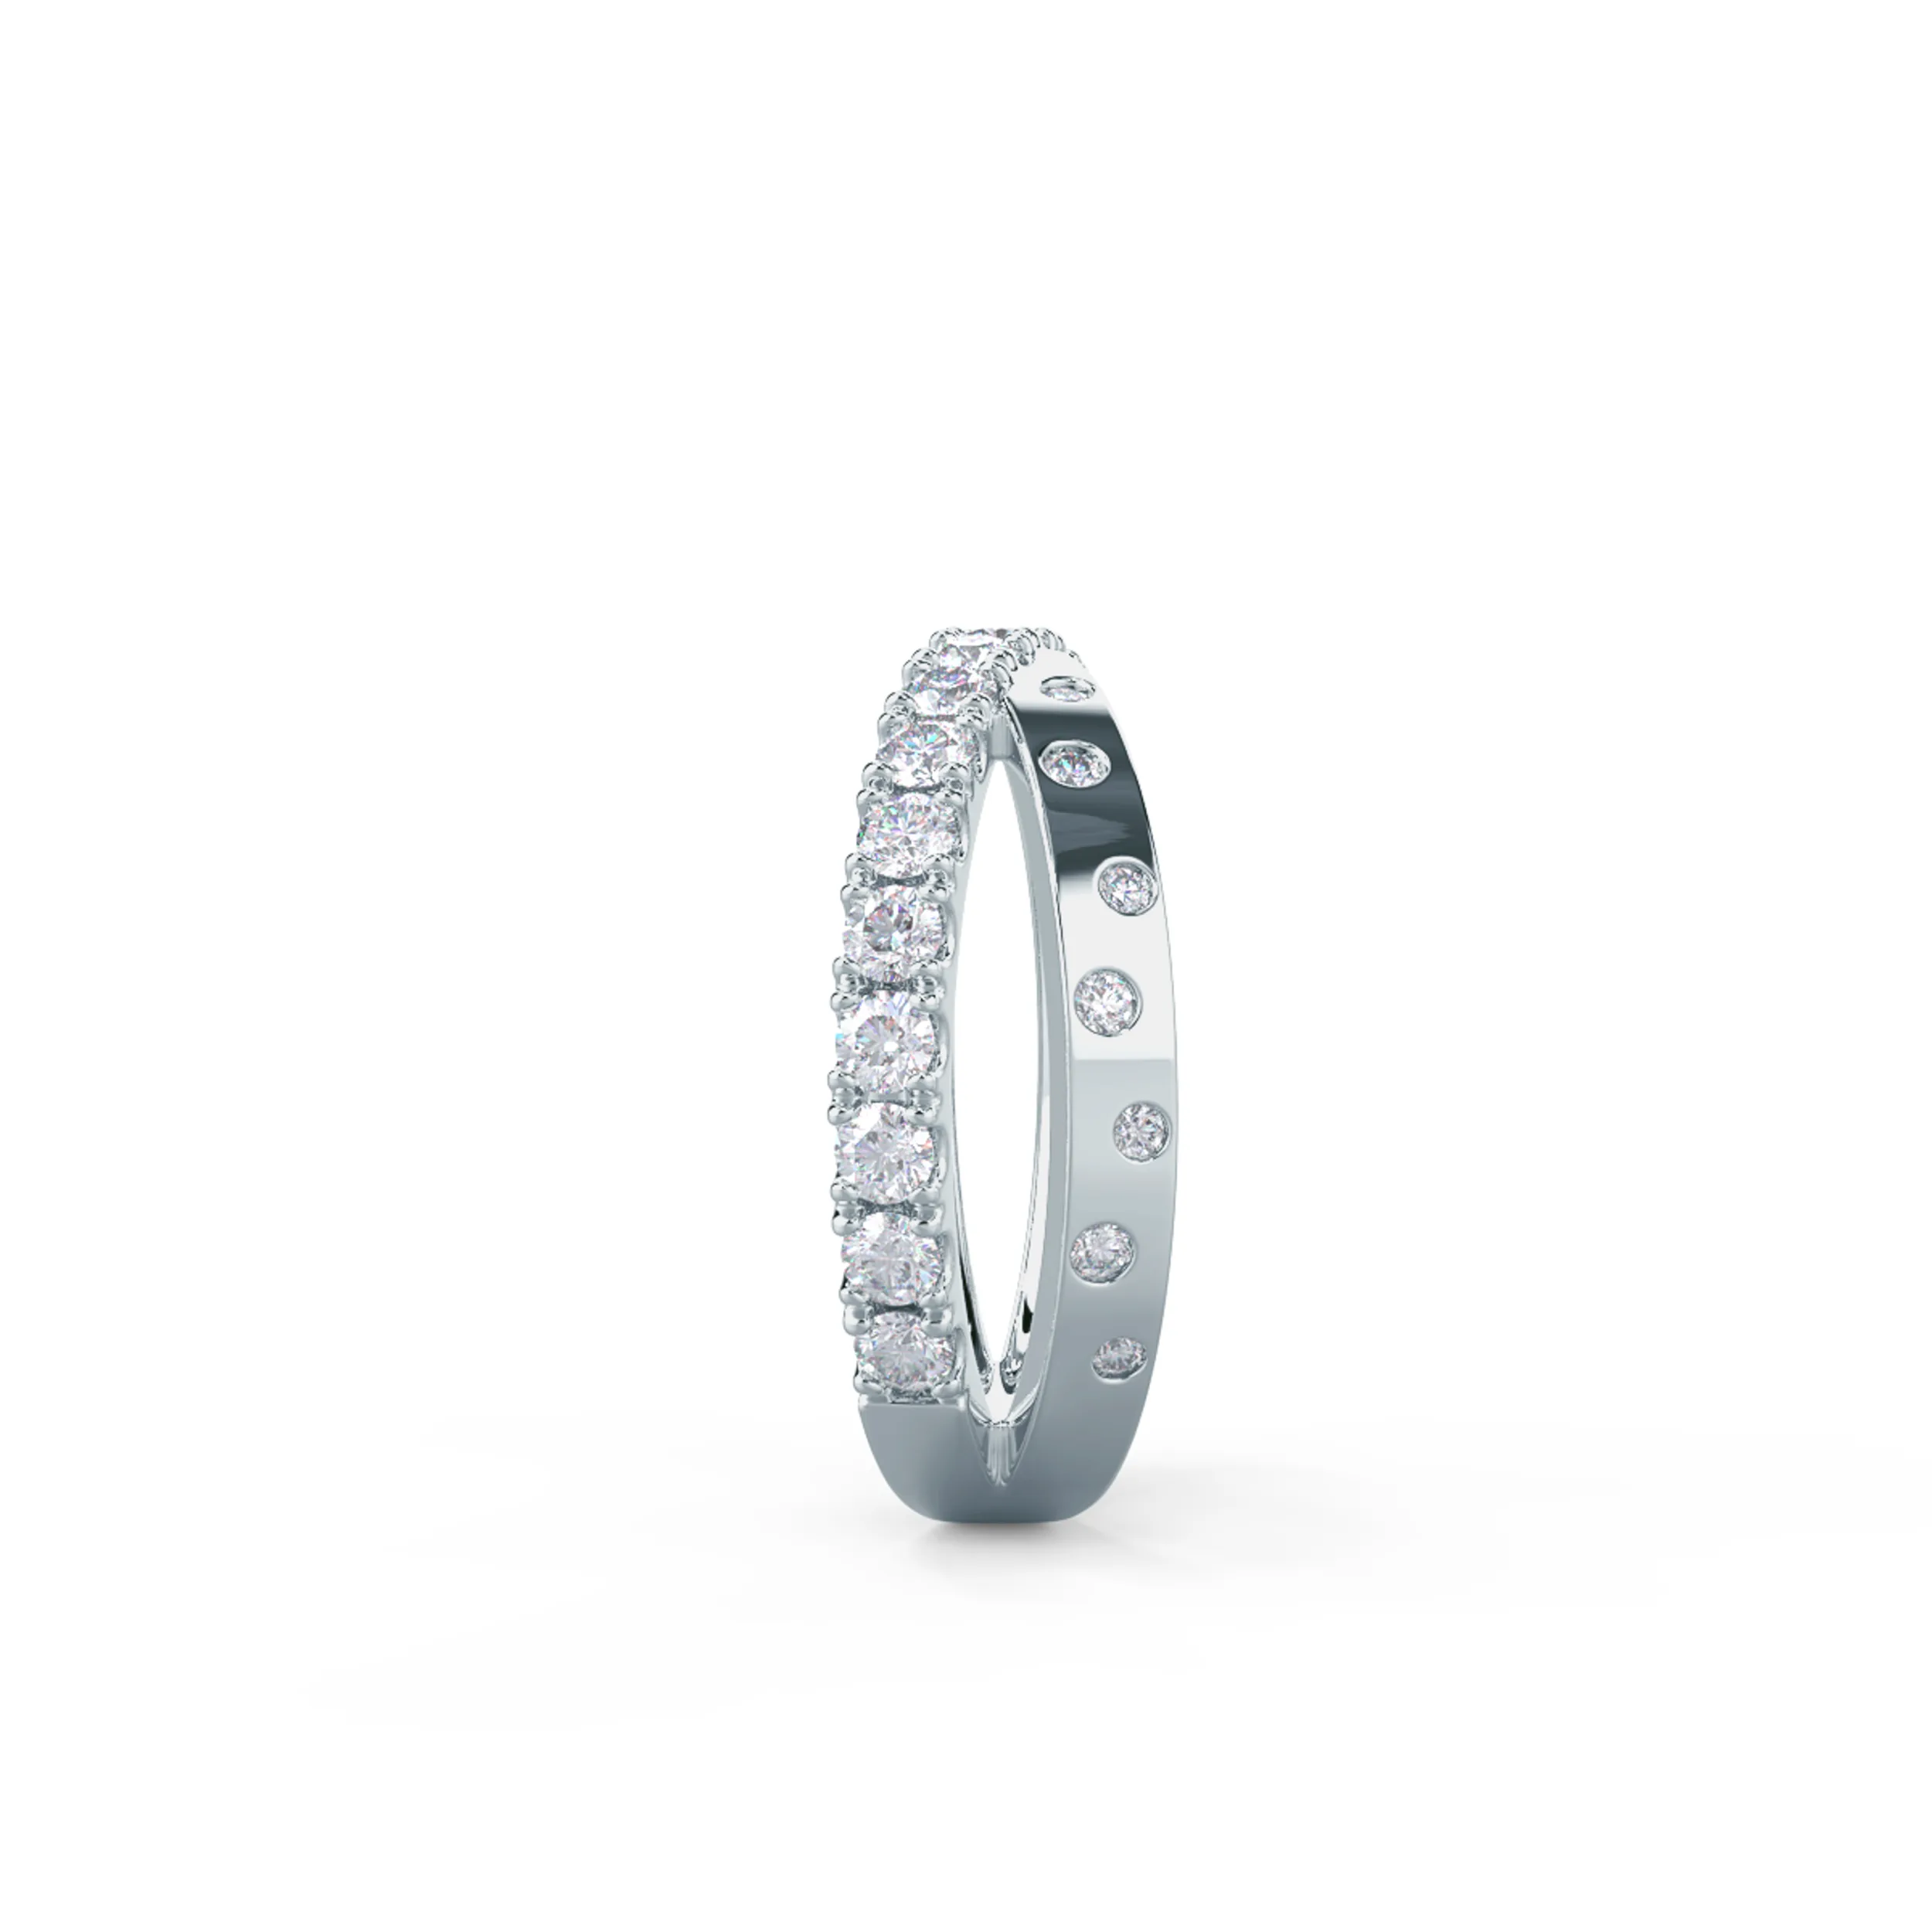 1.0 Carat Round Man Made Diamonds set in 18k White Gold X Pavé and Channel Half Band (Side View)